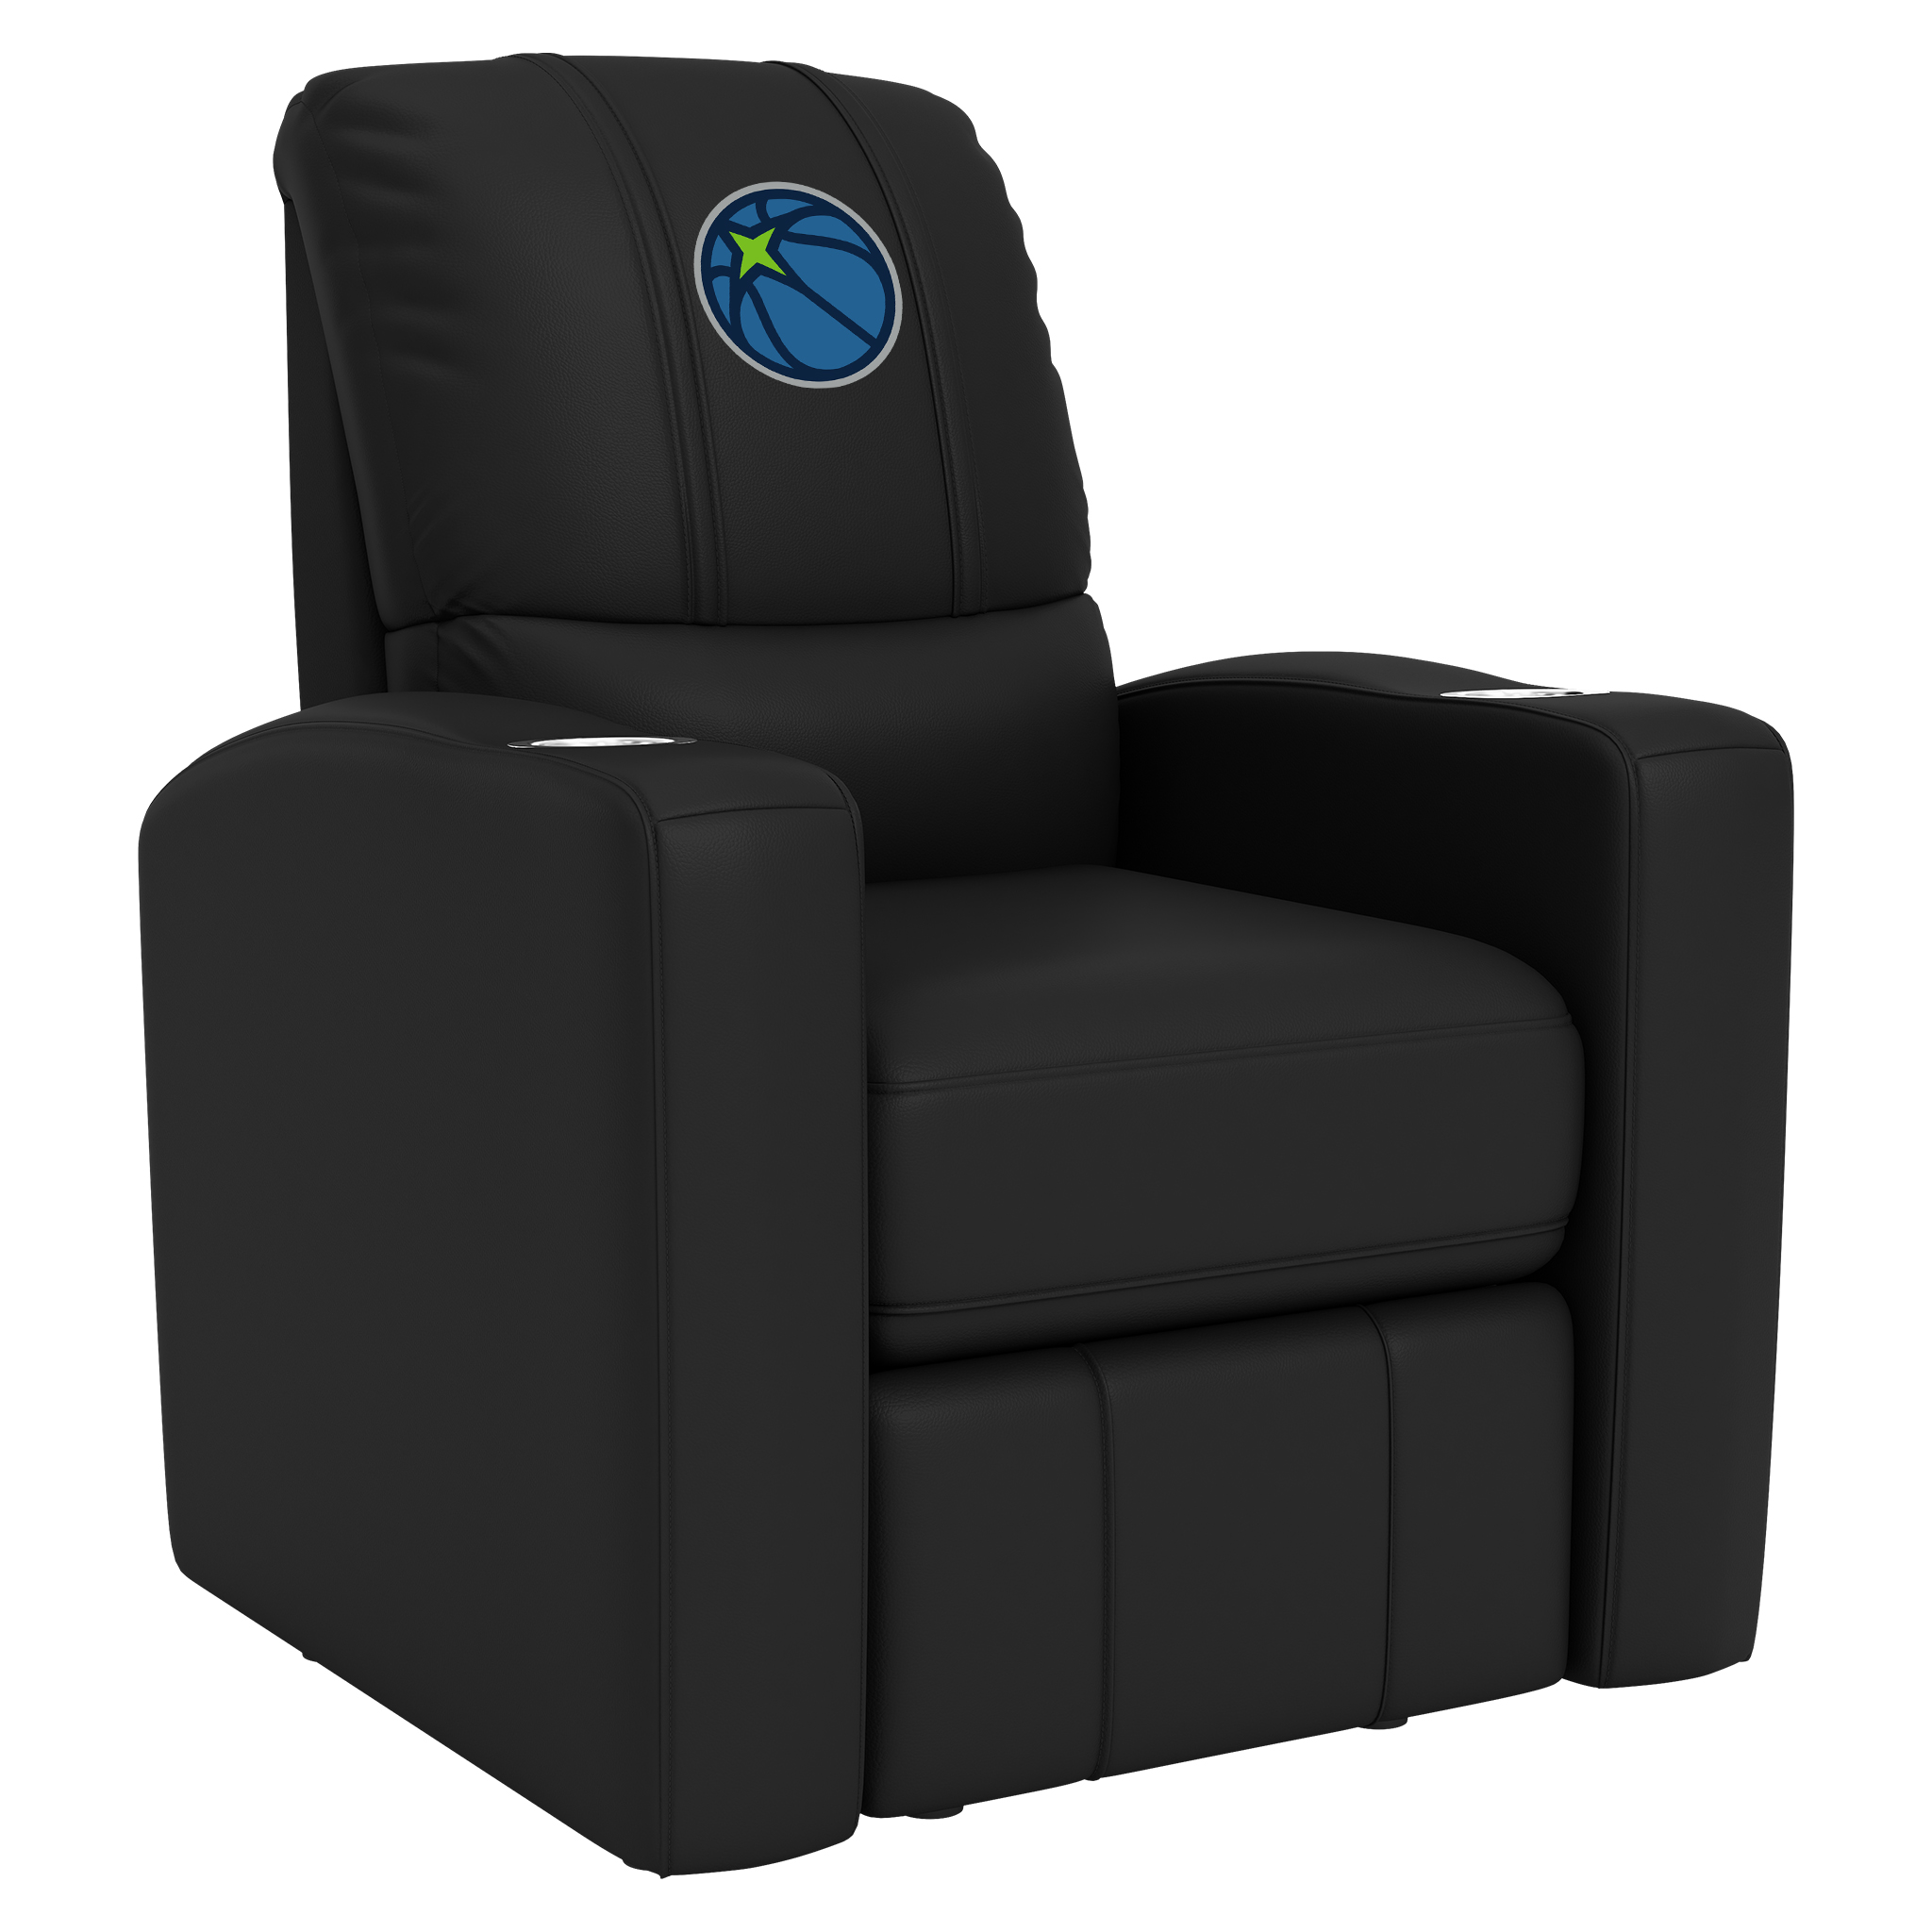 Minnesota Timberwolves Stealth Recliner with Minnesota Timberwolves Logo